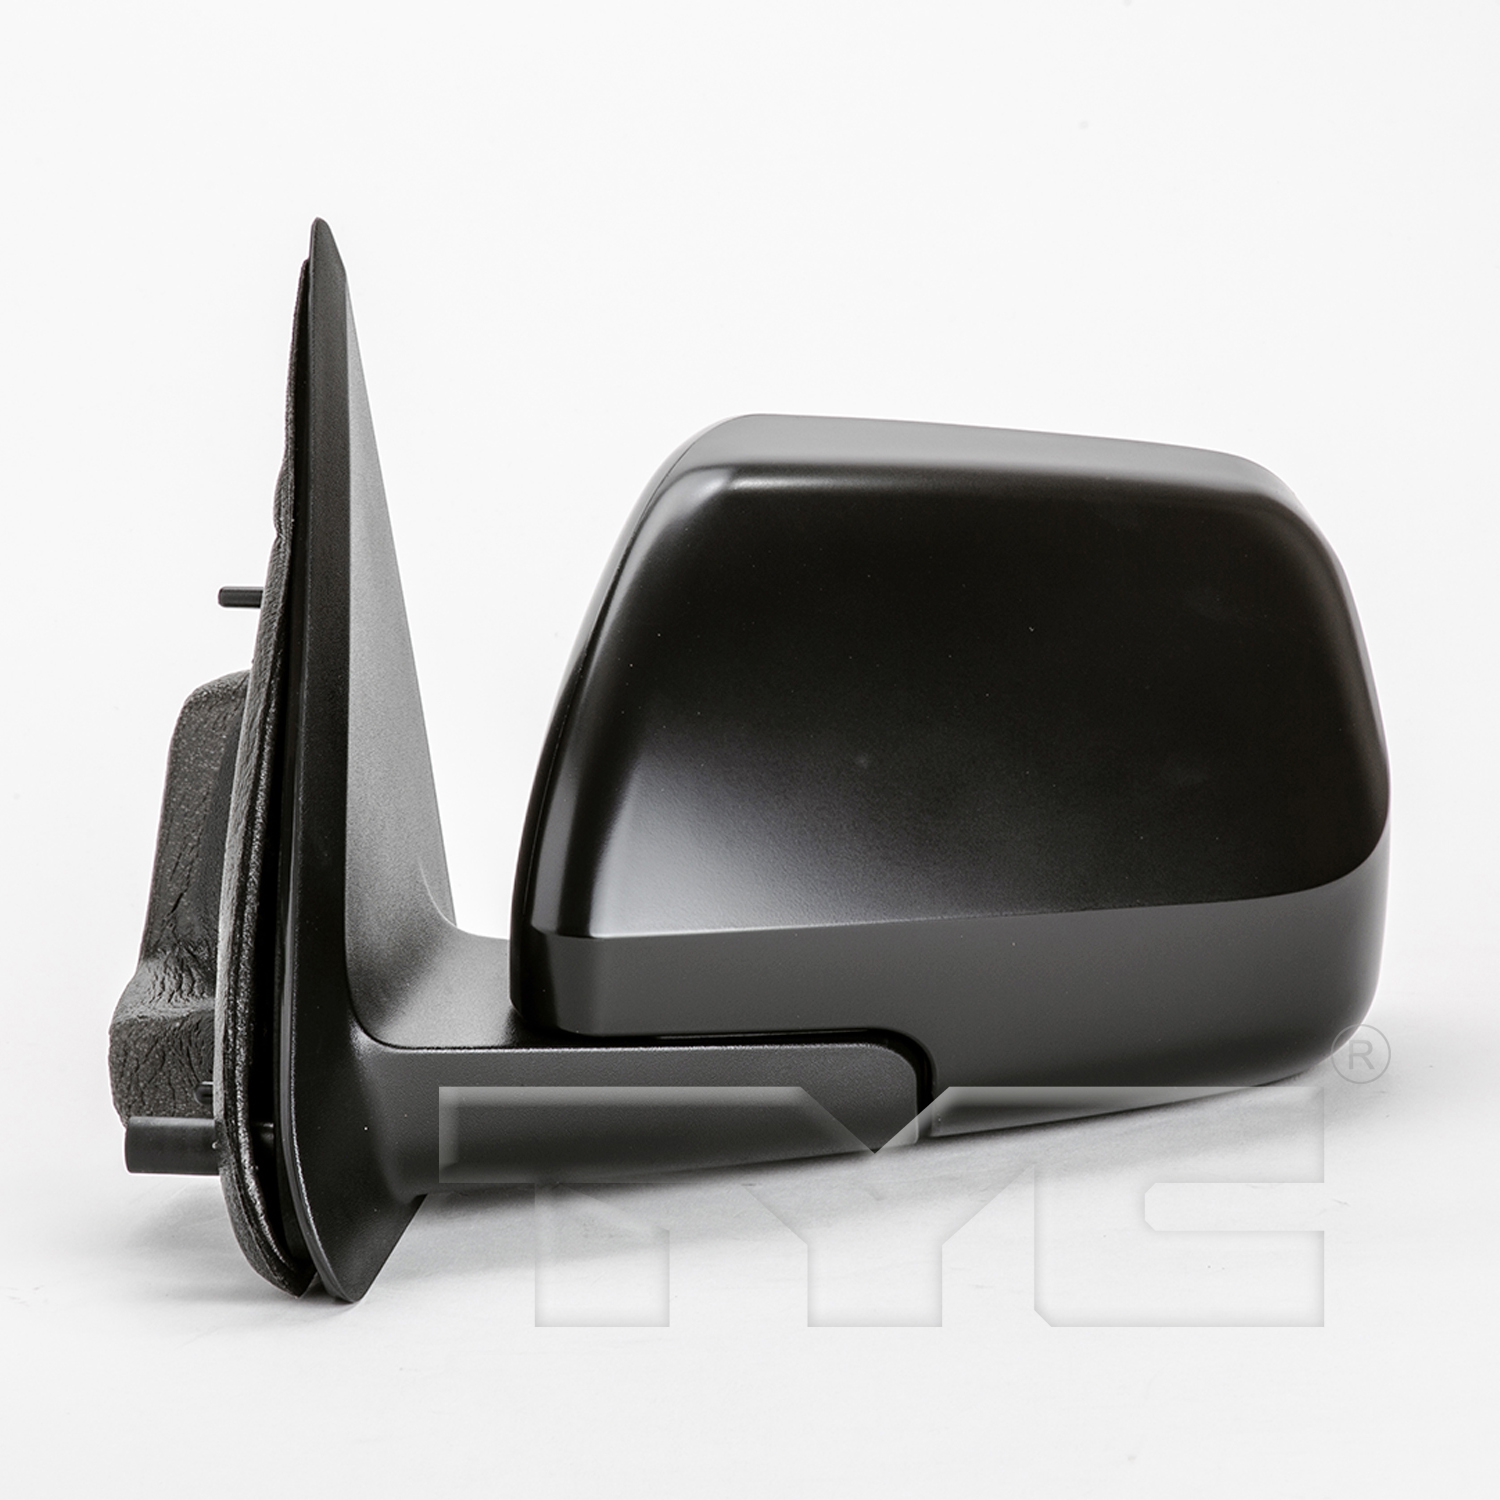 Aftermarket MIRRORS for FORD - ESCAPE, ESCAPE,08-09,LT Mirror outside rear view